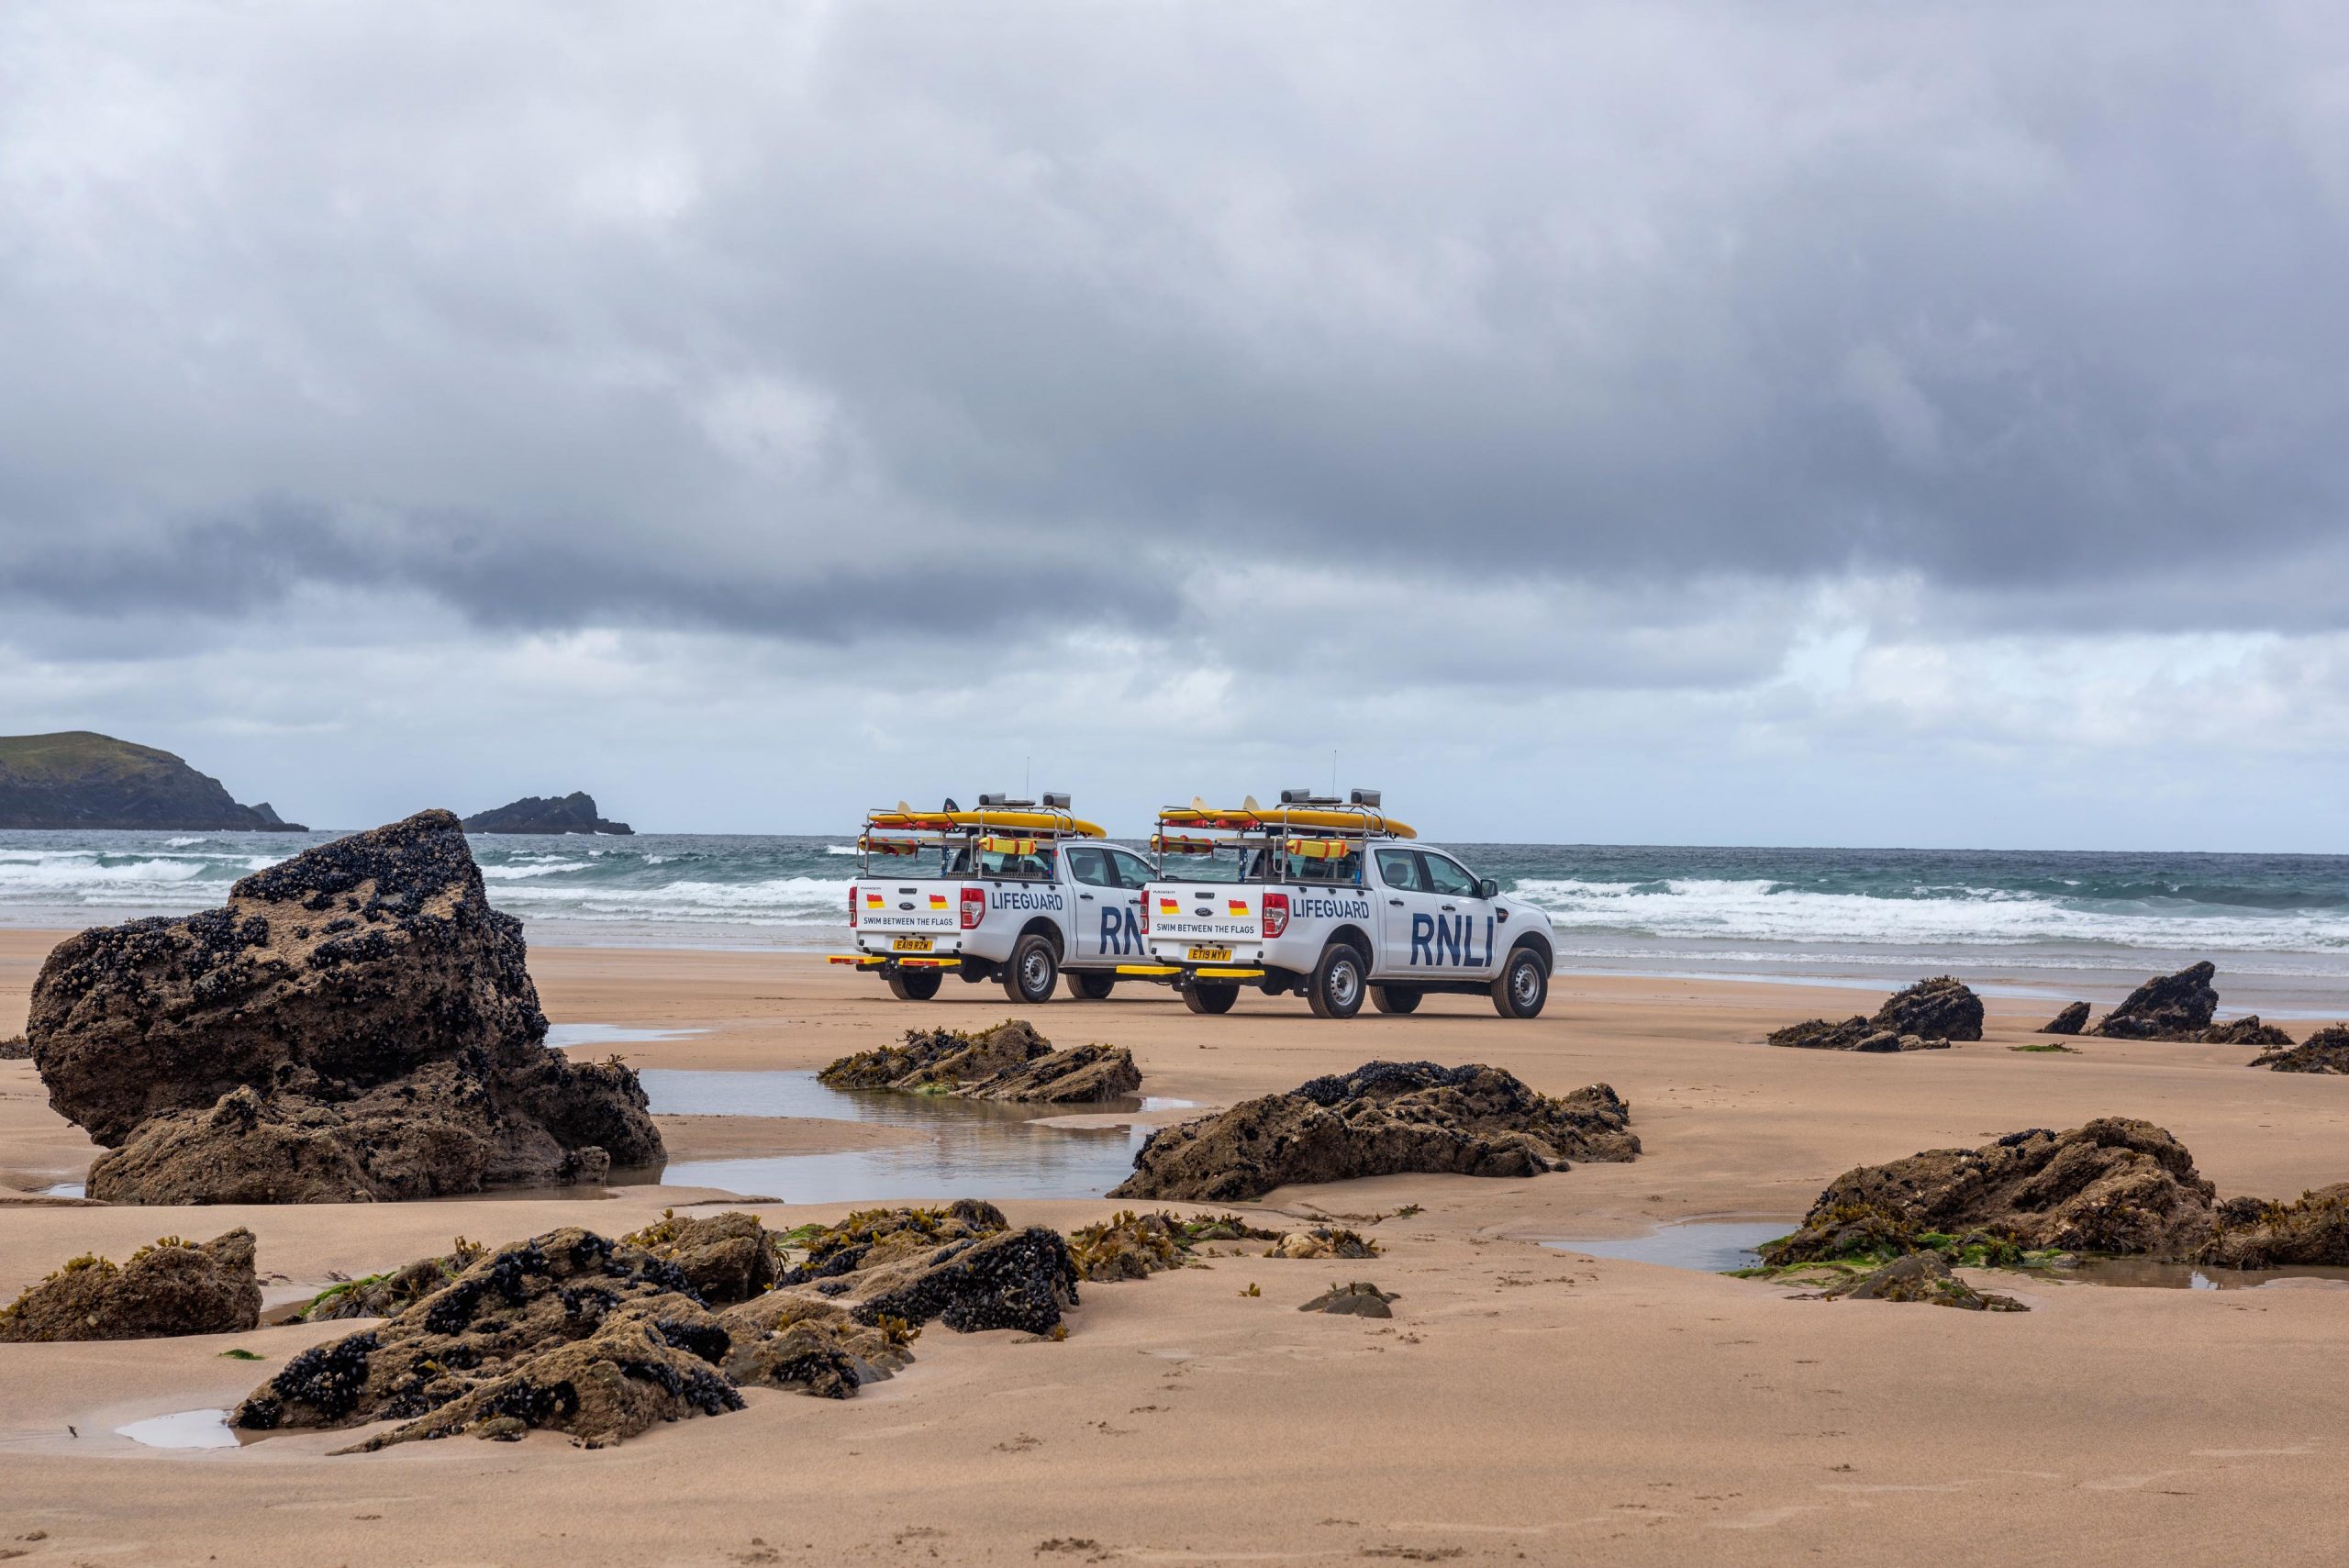 A powerful scene captured by Wright Content, featuring two Ford pickups adorned with the RNLI lifeguard logo, positioned on a beach between rugged rocks, facing the swelling sea. With surfboards mounted on top, the vehicles stand ready for action, manned by vigilant lifeguards prepared for any situation. Wright Content specializes in evocative brand photography.